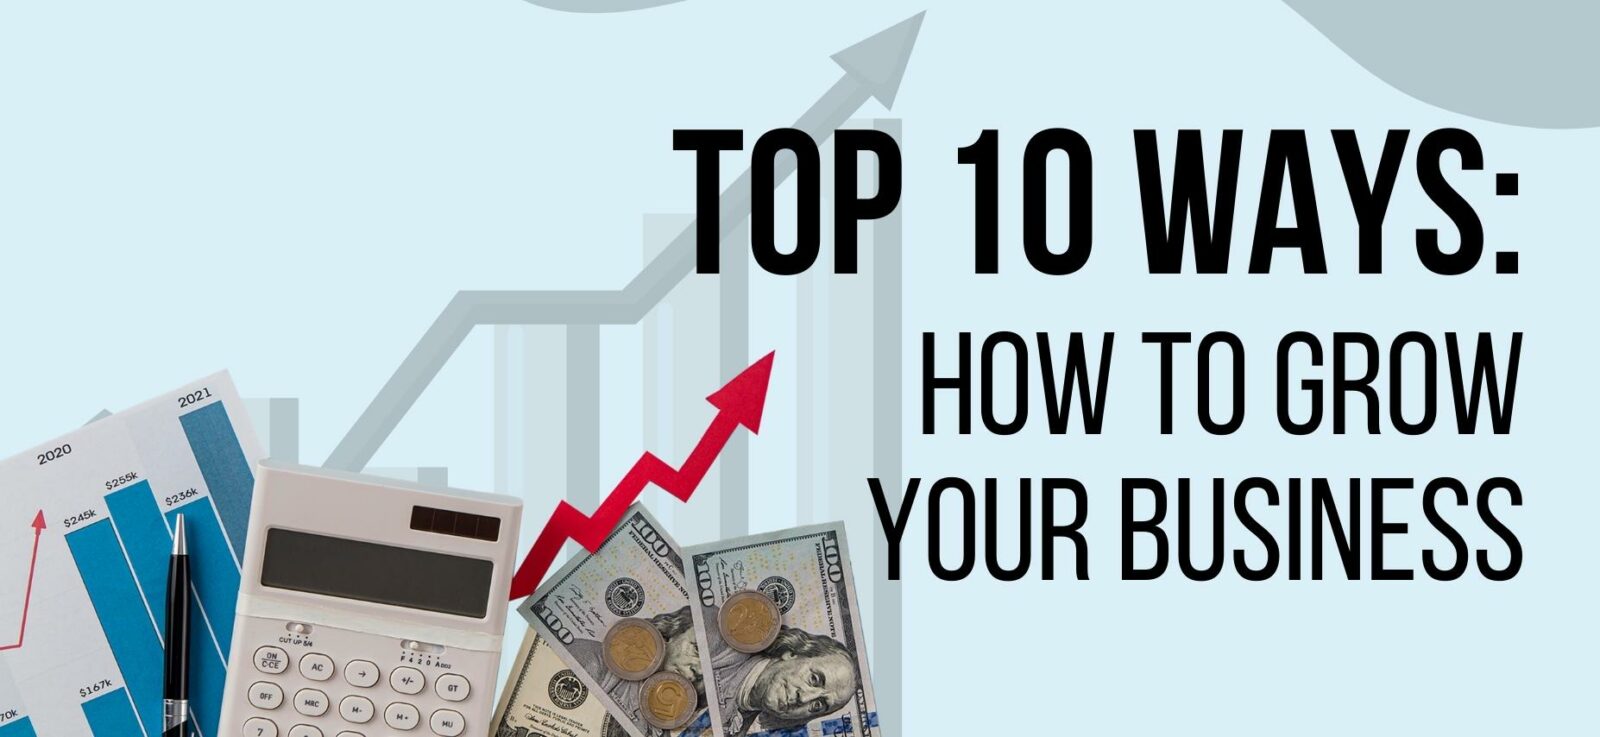 Top 10 Ways How to Grow Your Business